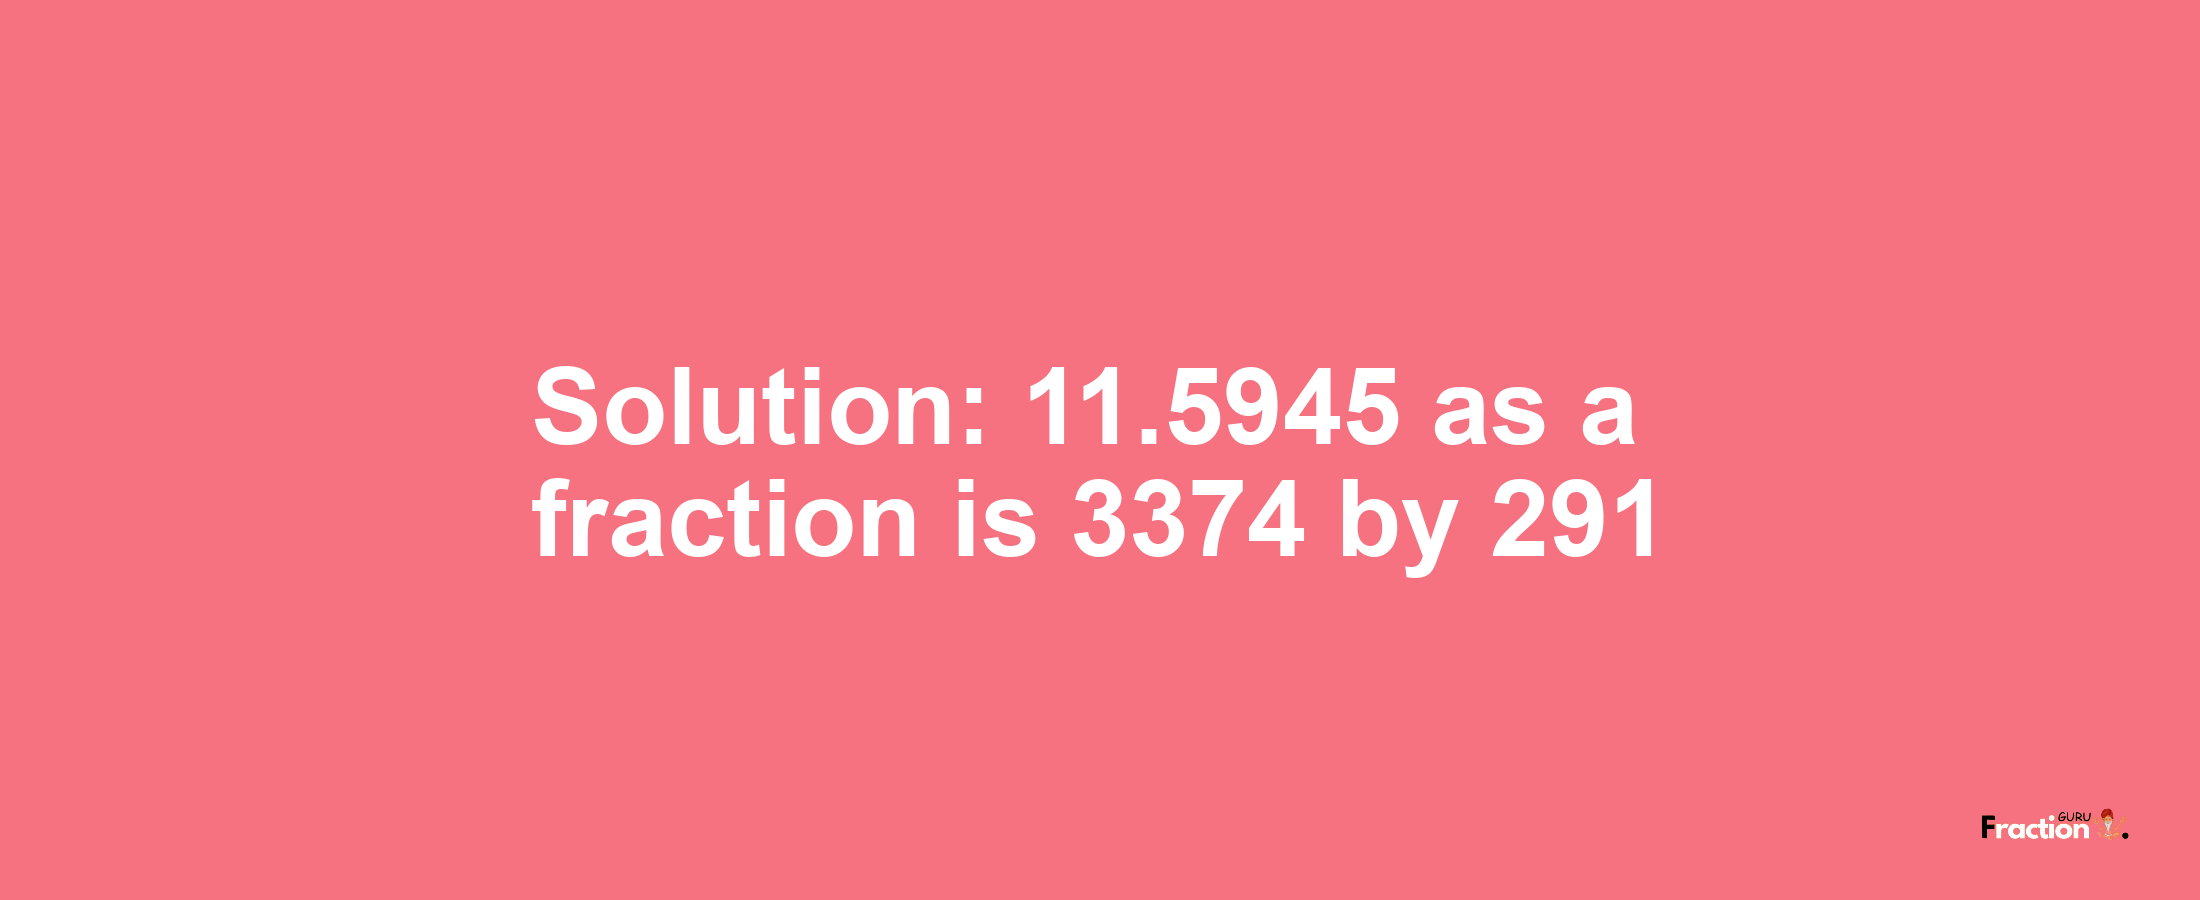 Solution:11.5945 as a fraction is 3374/291